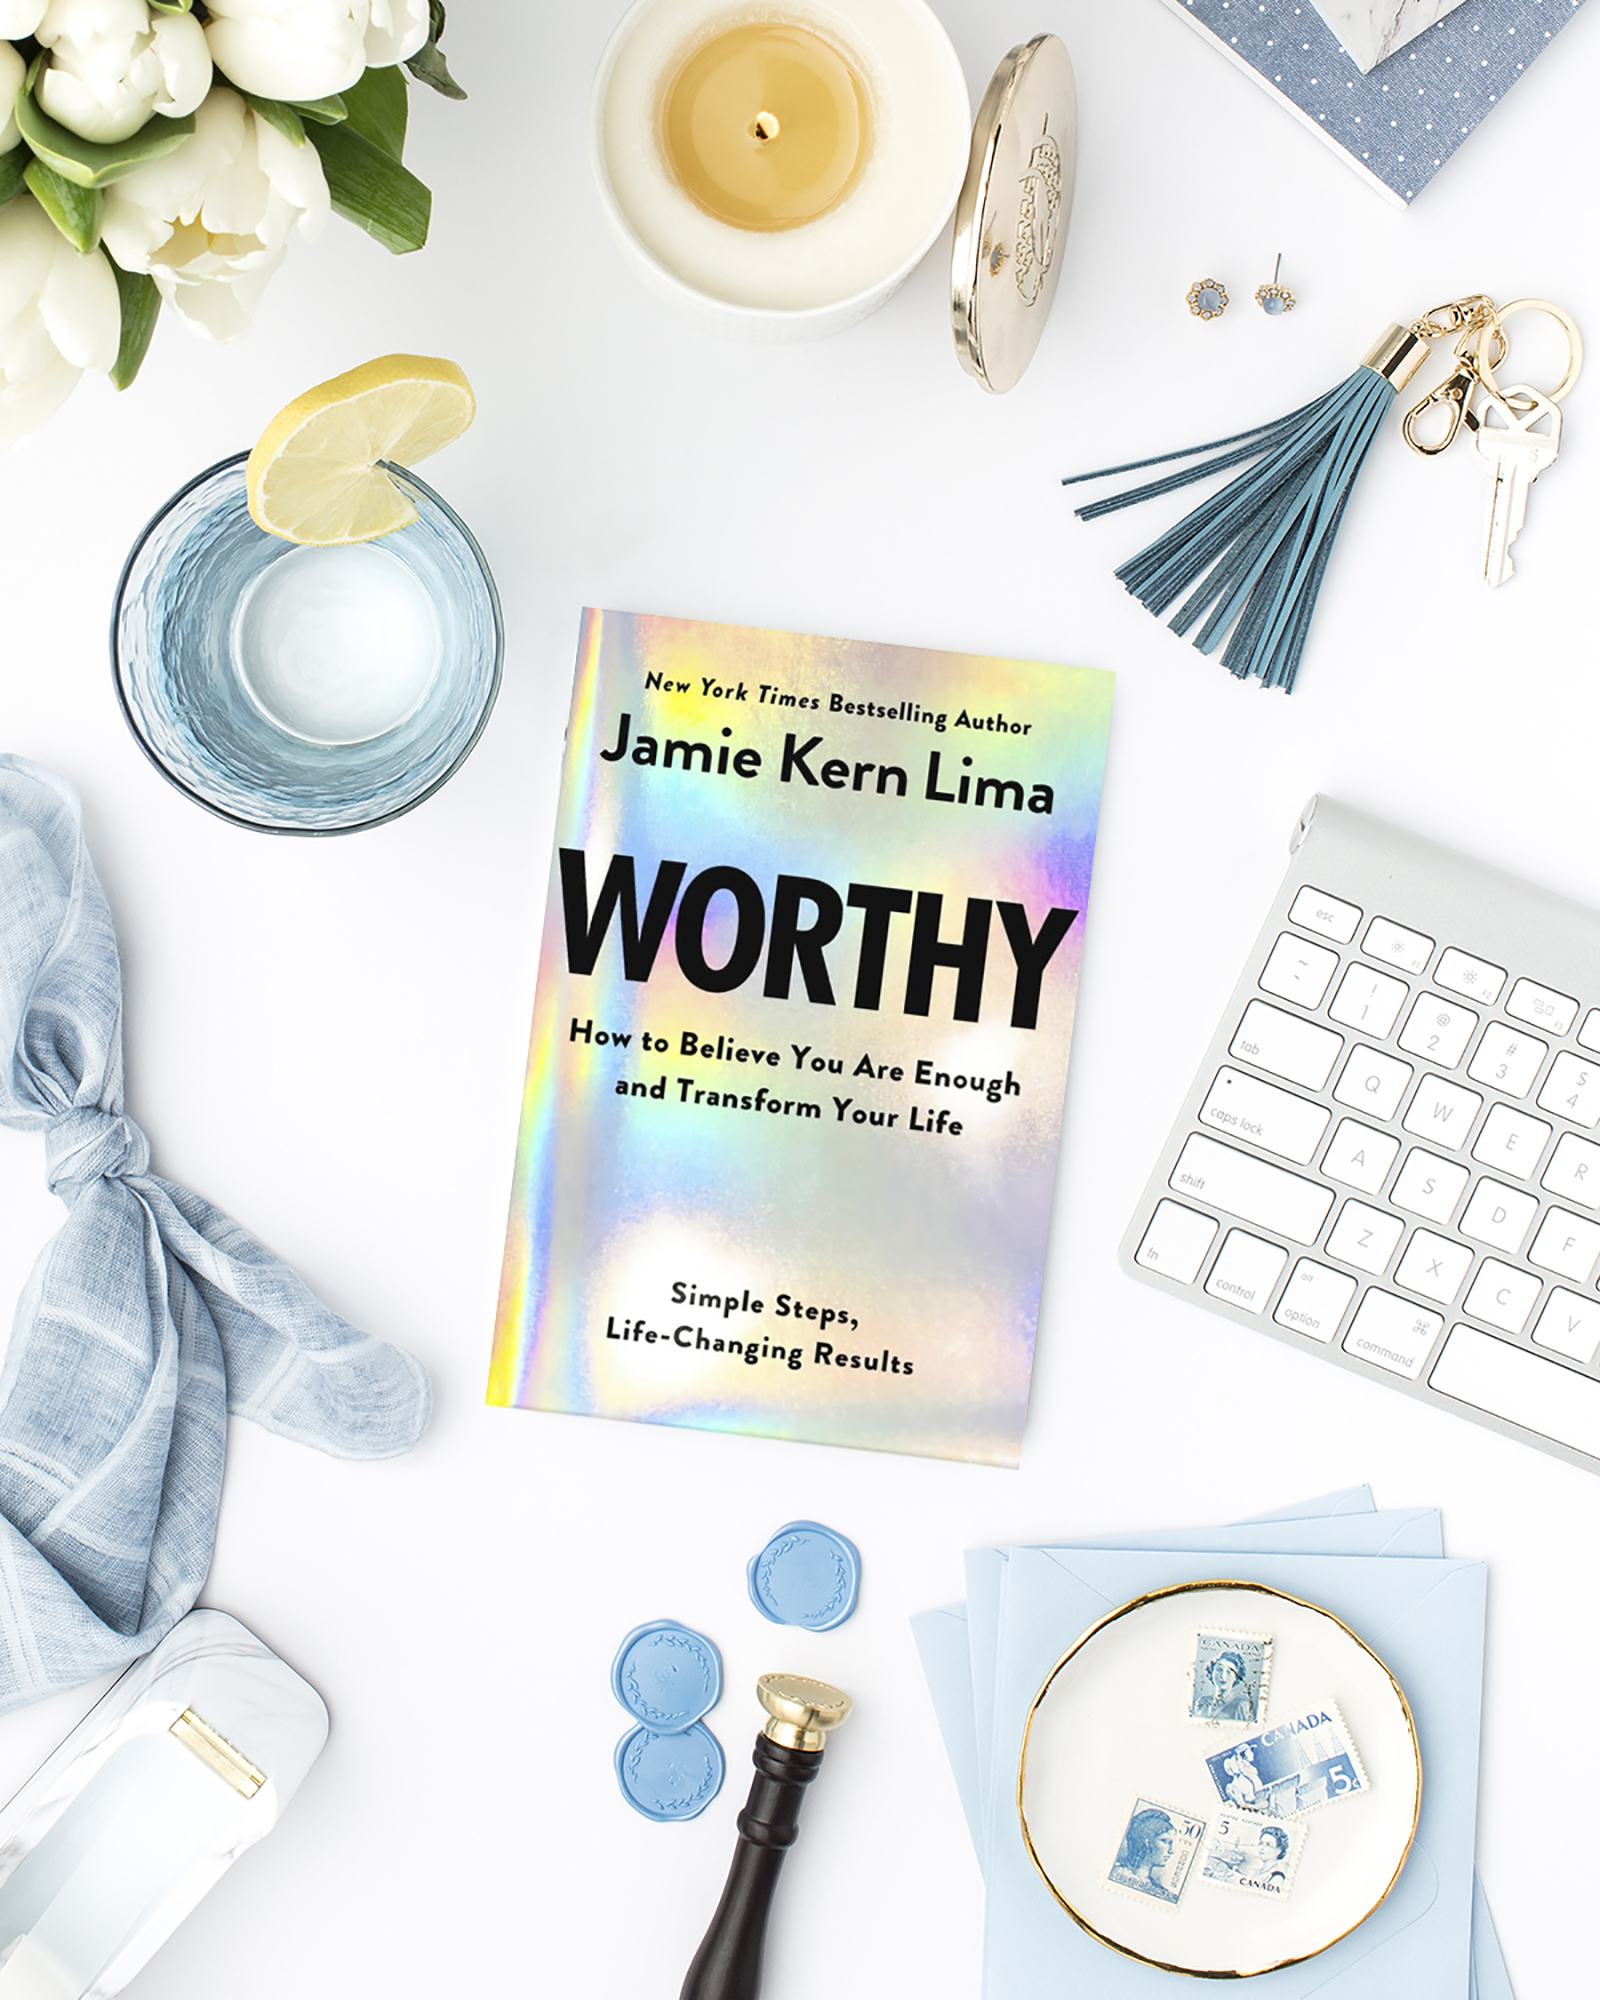 The book Worthy by Jamie Kern Lima will be our next book for our mastermind book club